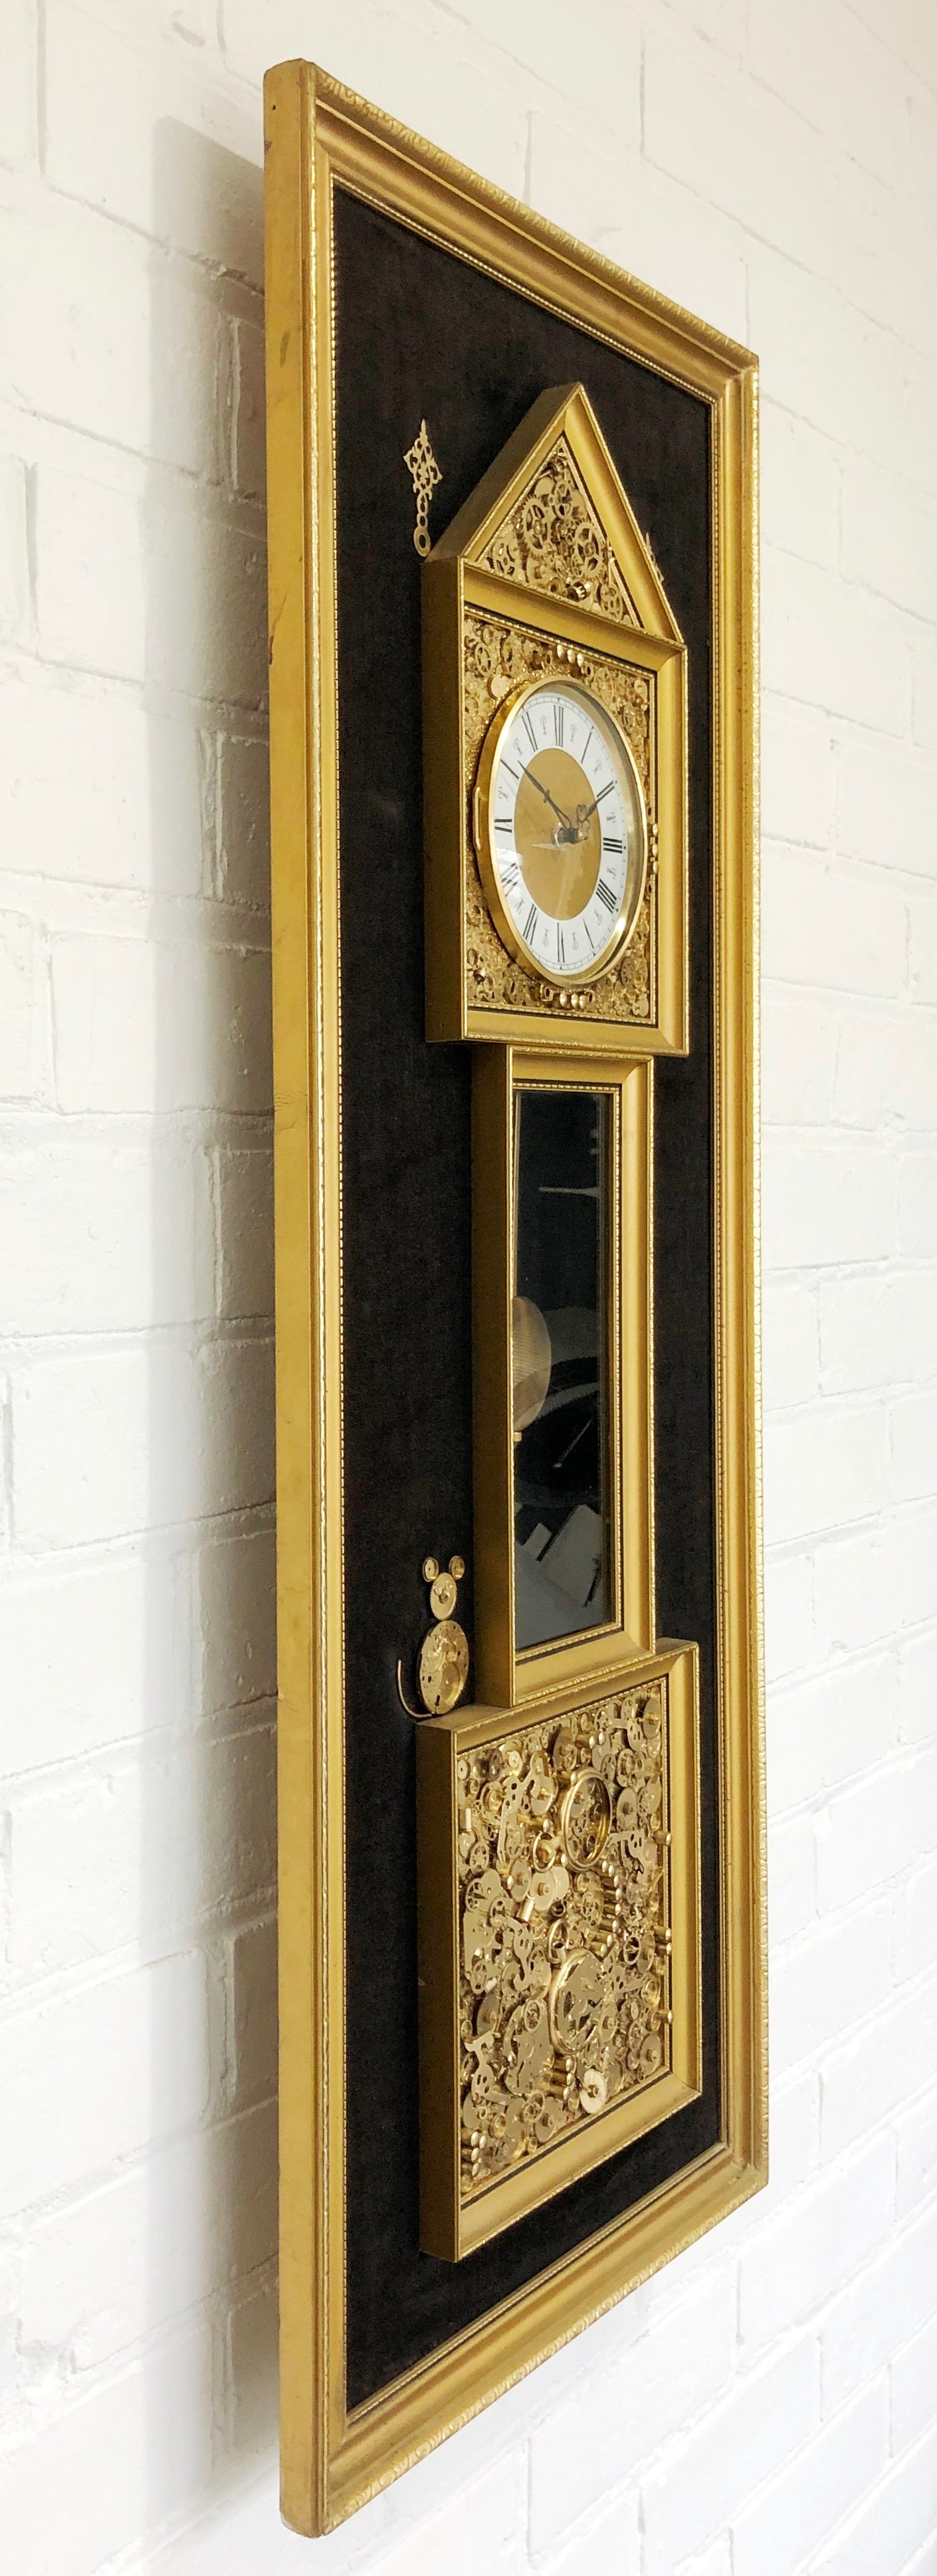 Vintage  HICKORY DICKORY DOCK Battery Grand Style Wall Clock | eXibit collection